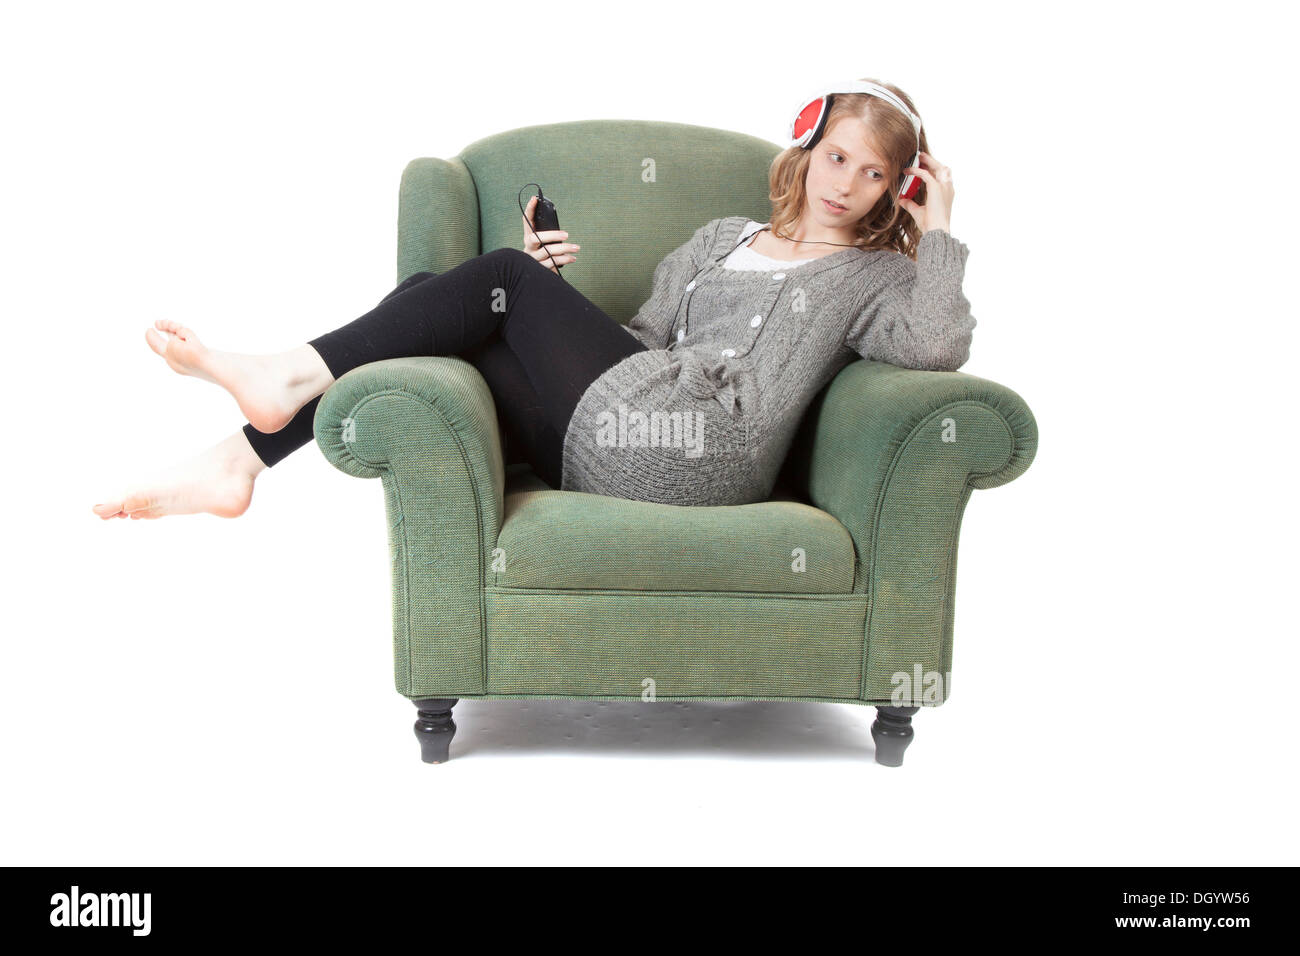 young pretty woman listening to music in armchair against white background Stock Photo